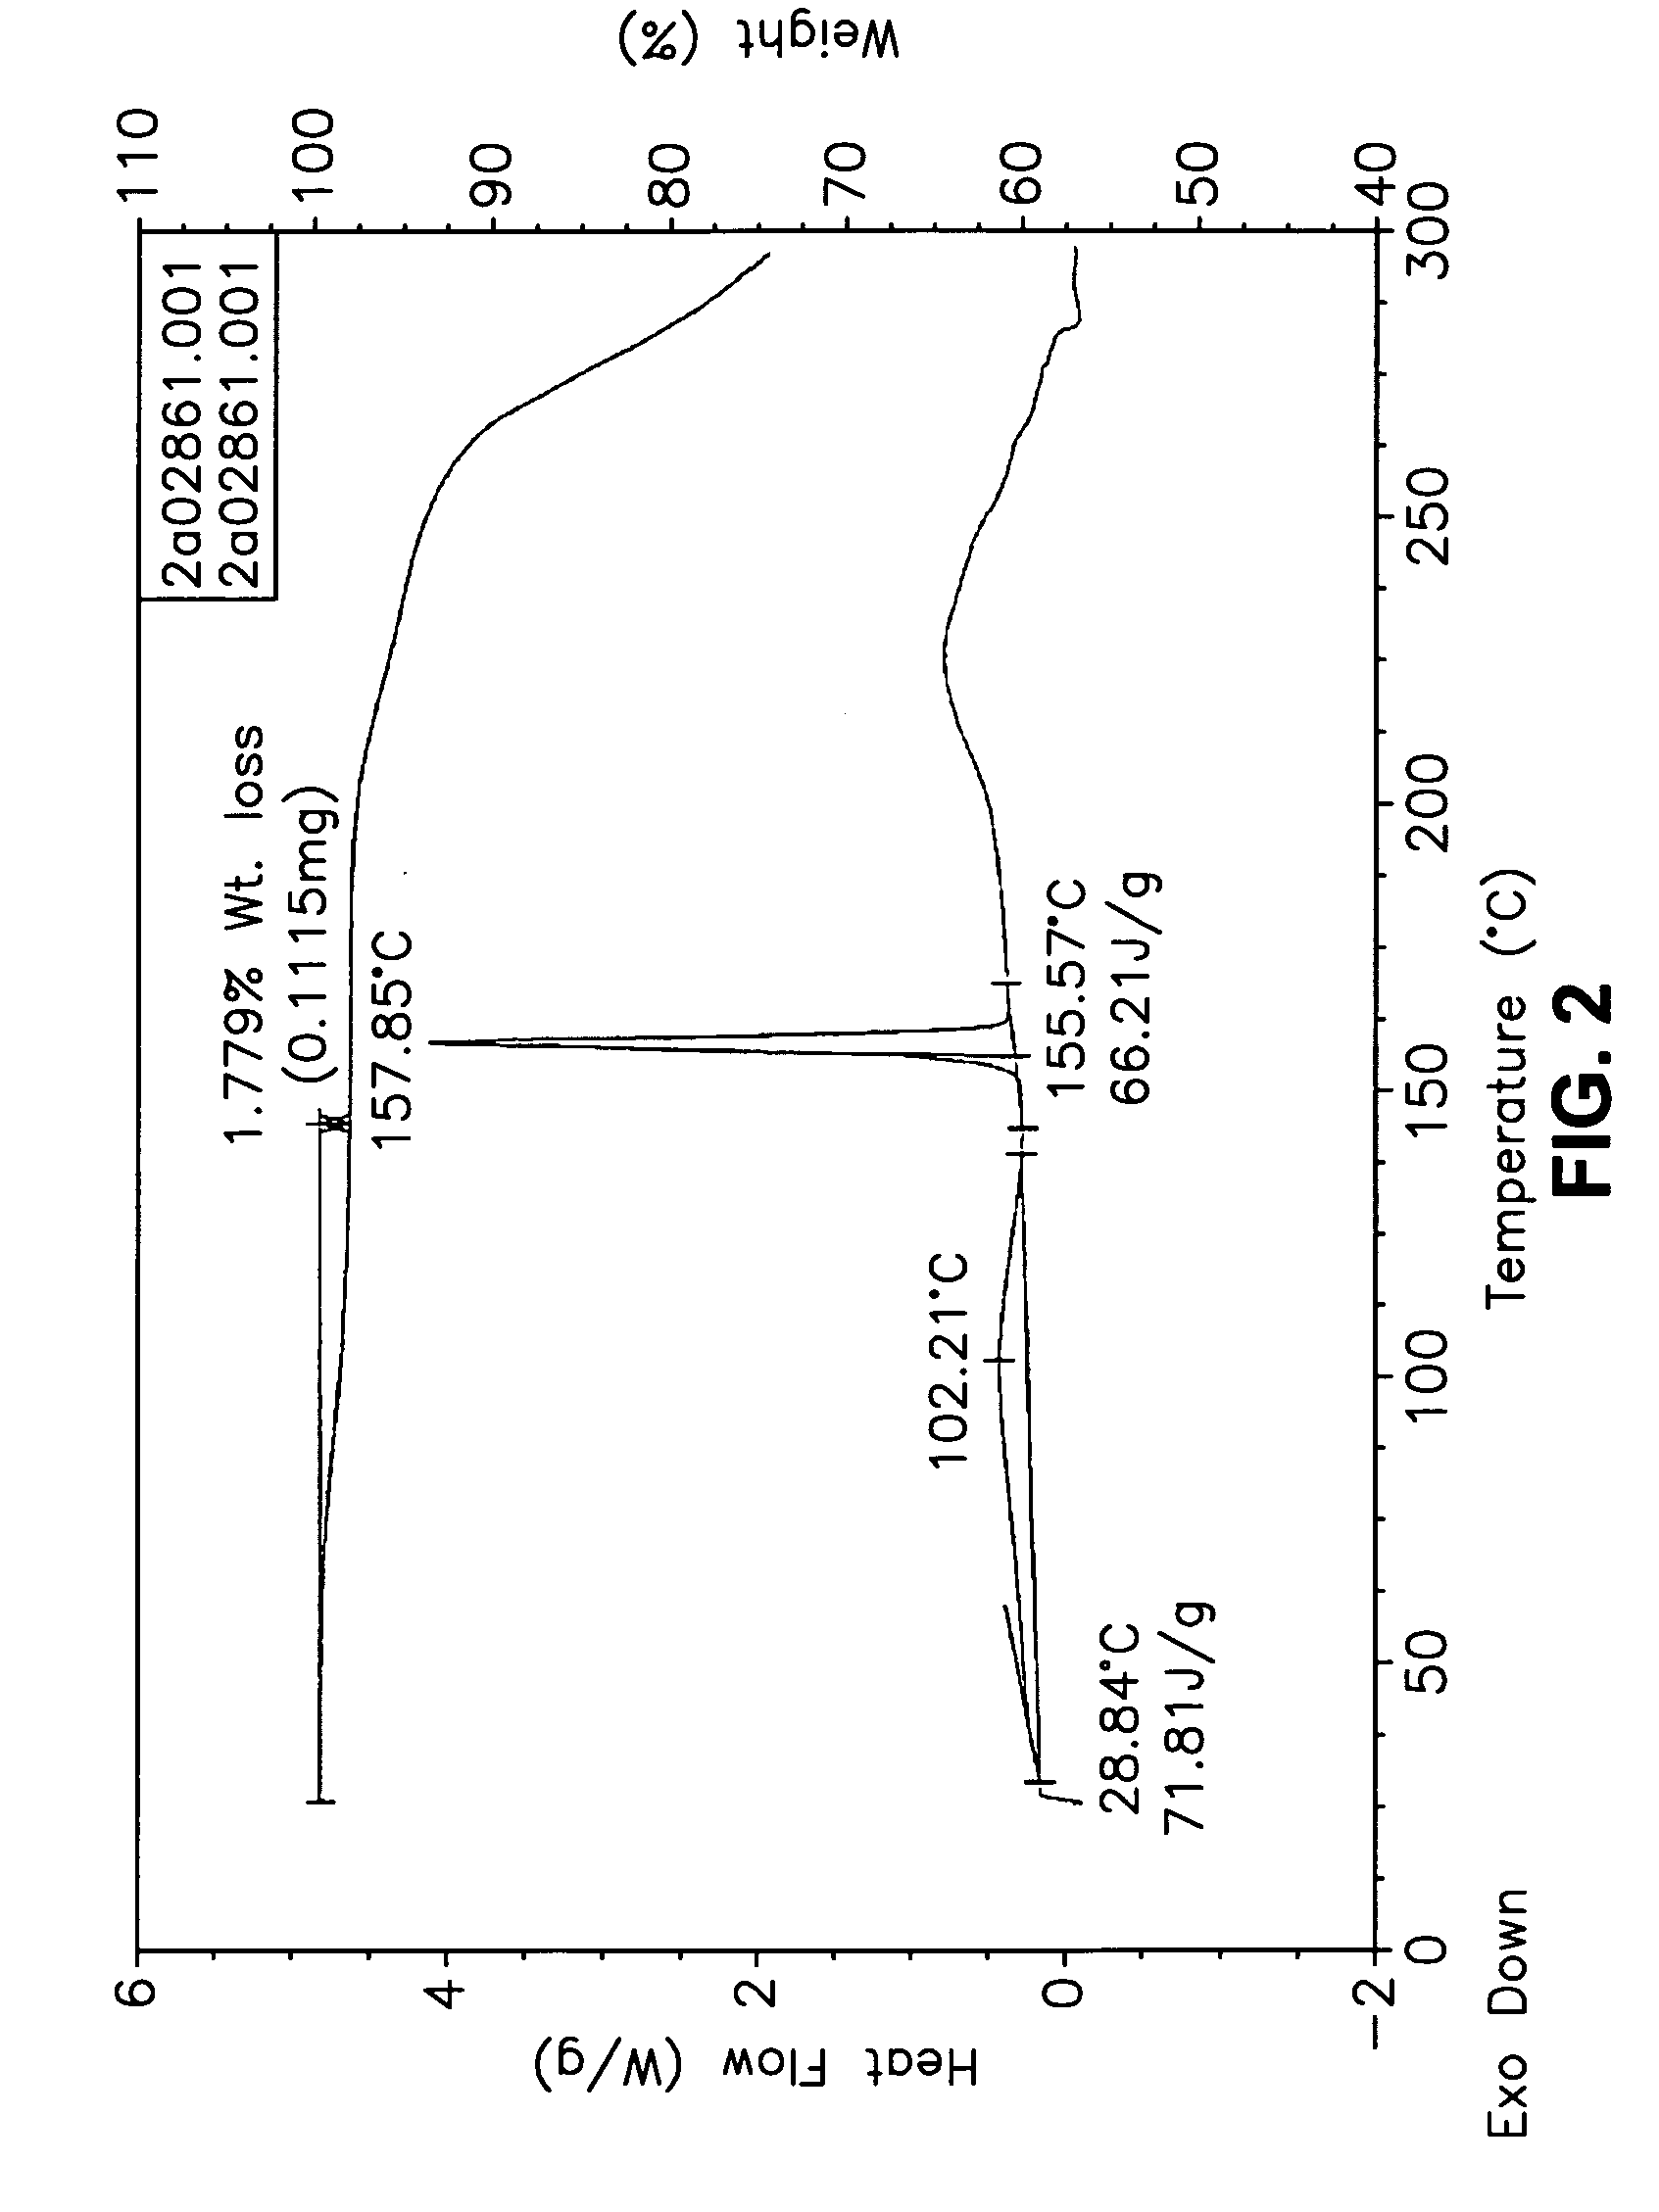 Carvedilol free base, salts, anhydrous forms or solvates thereof, corresponding pharmaceutical compositions, controlled release formulations, and treatment or delivery methods